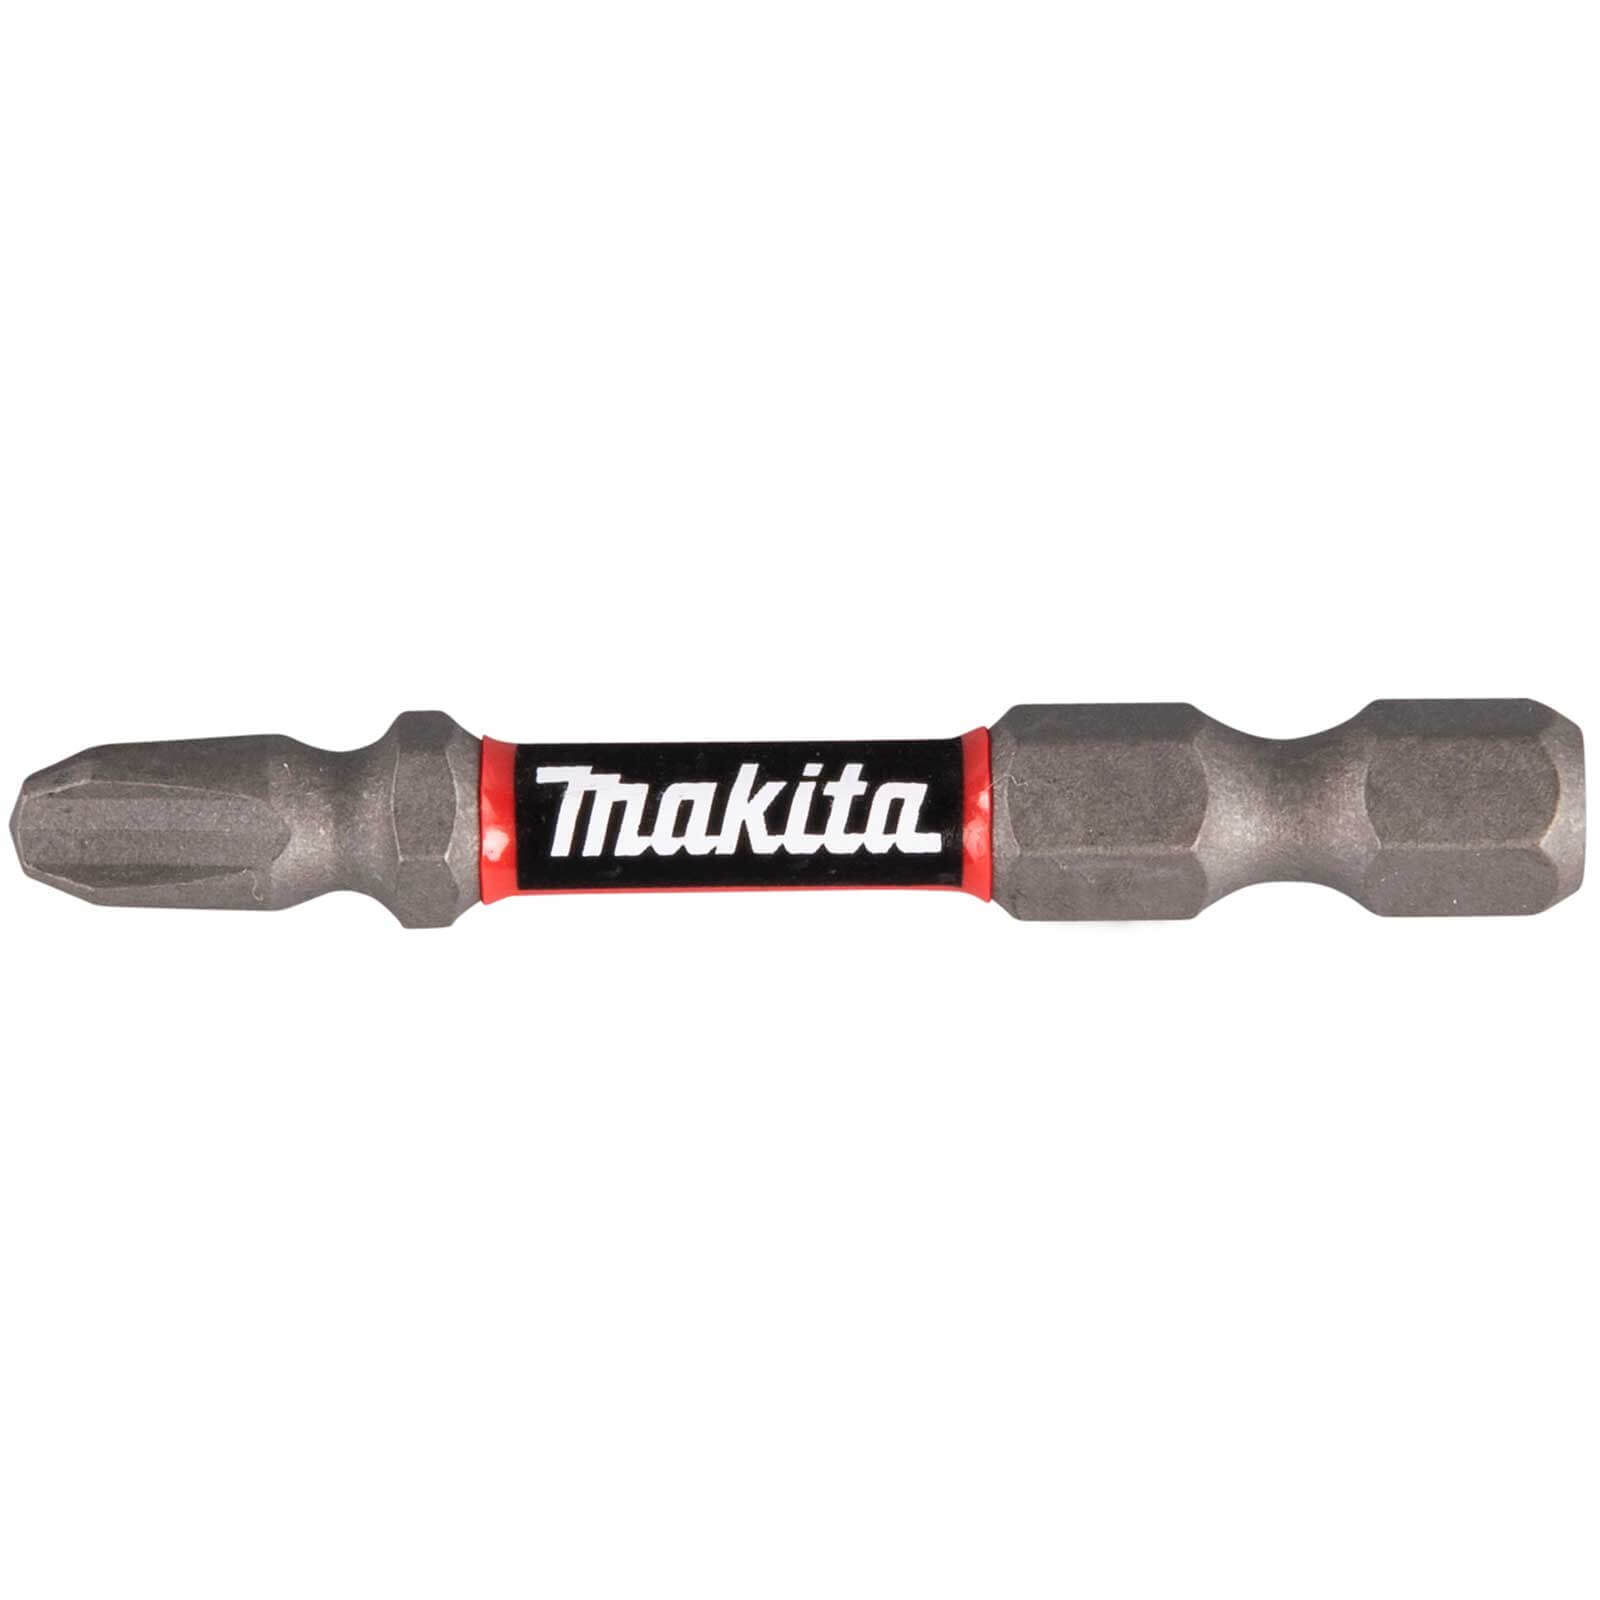 Image of Makita Impact Premier Double Torsion Philips Screwdriver Bits PH3 50mm Pack of 2